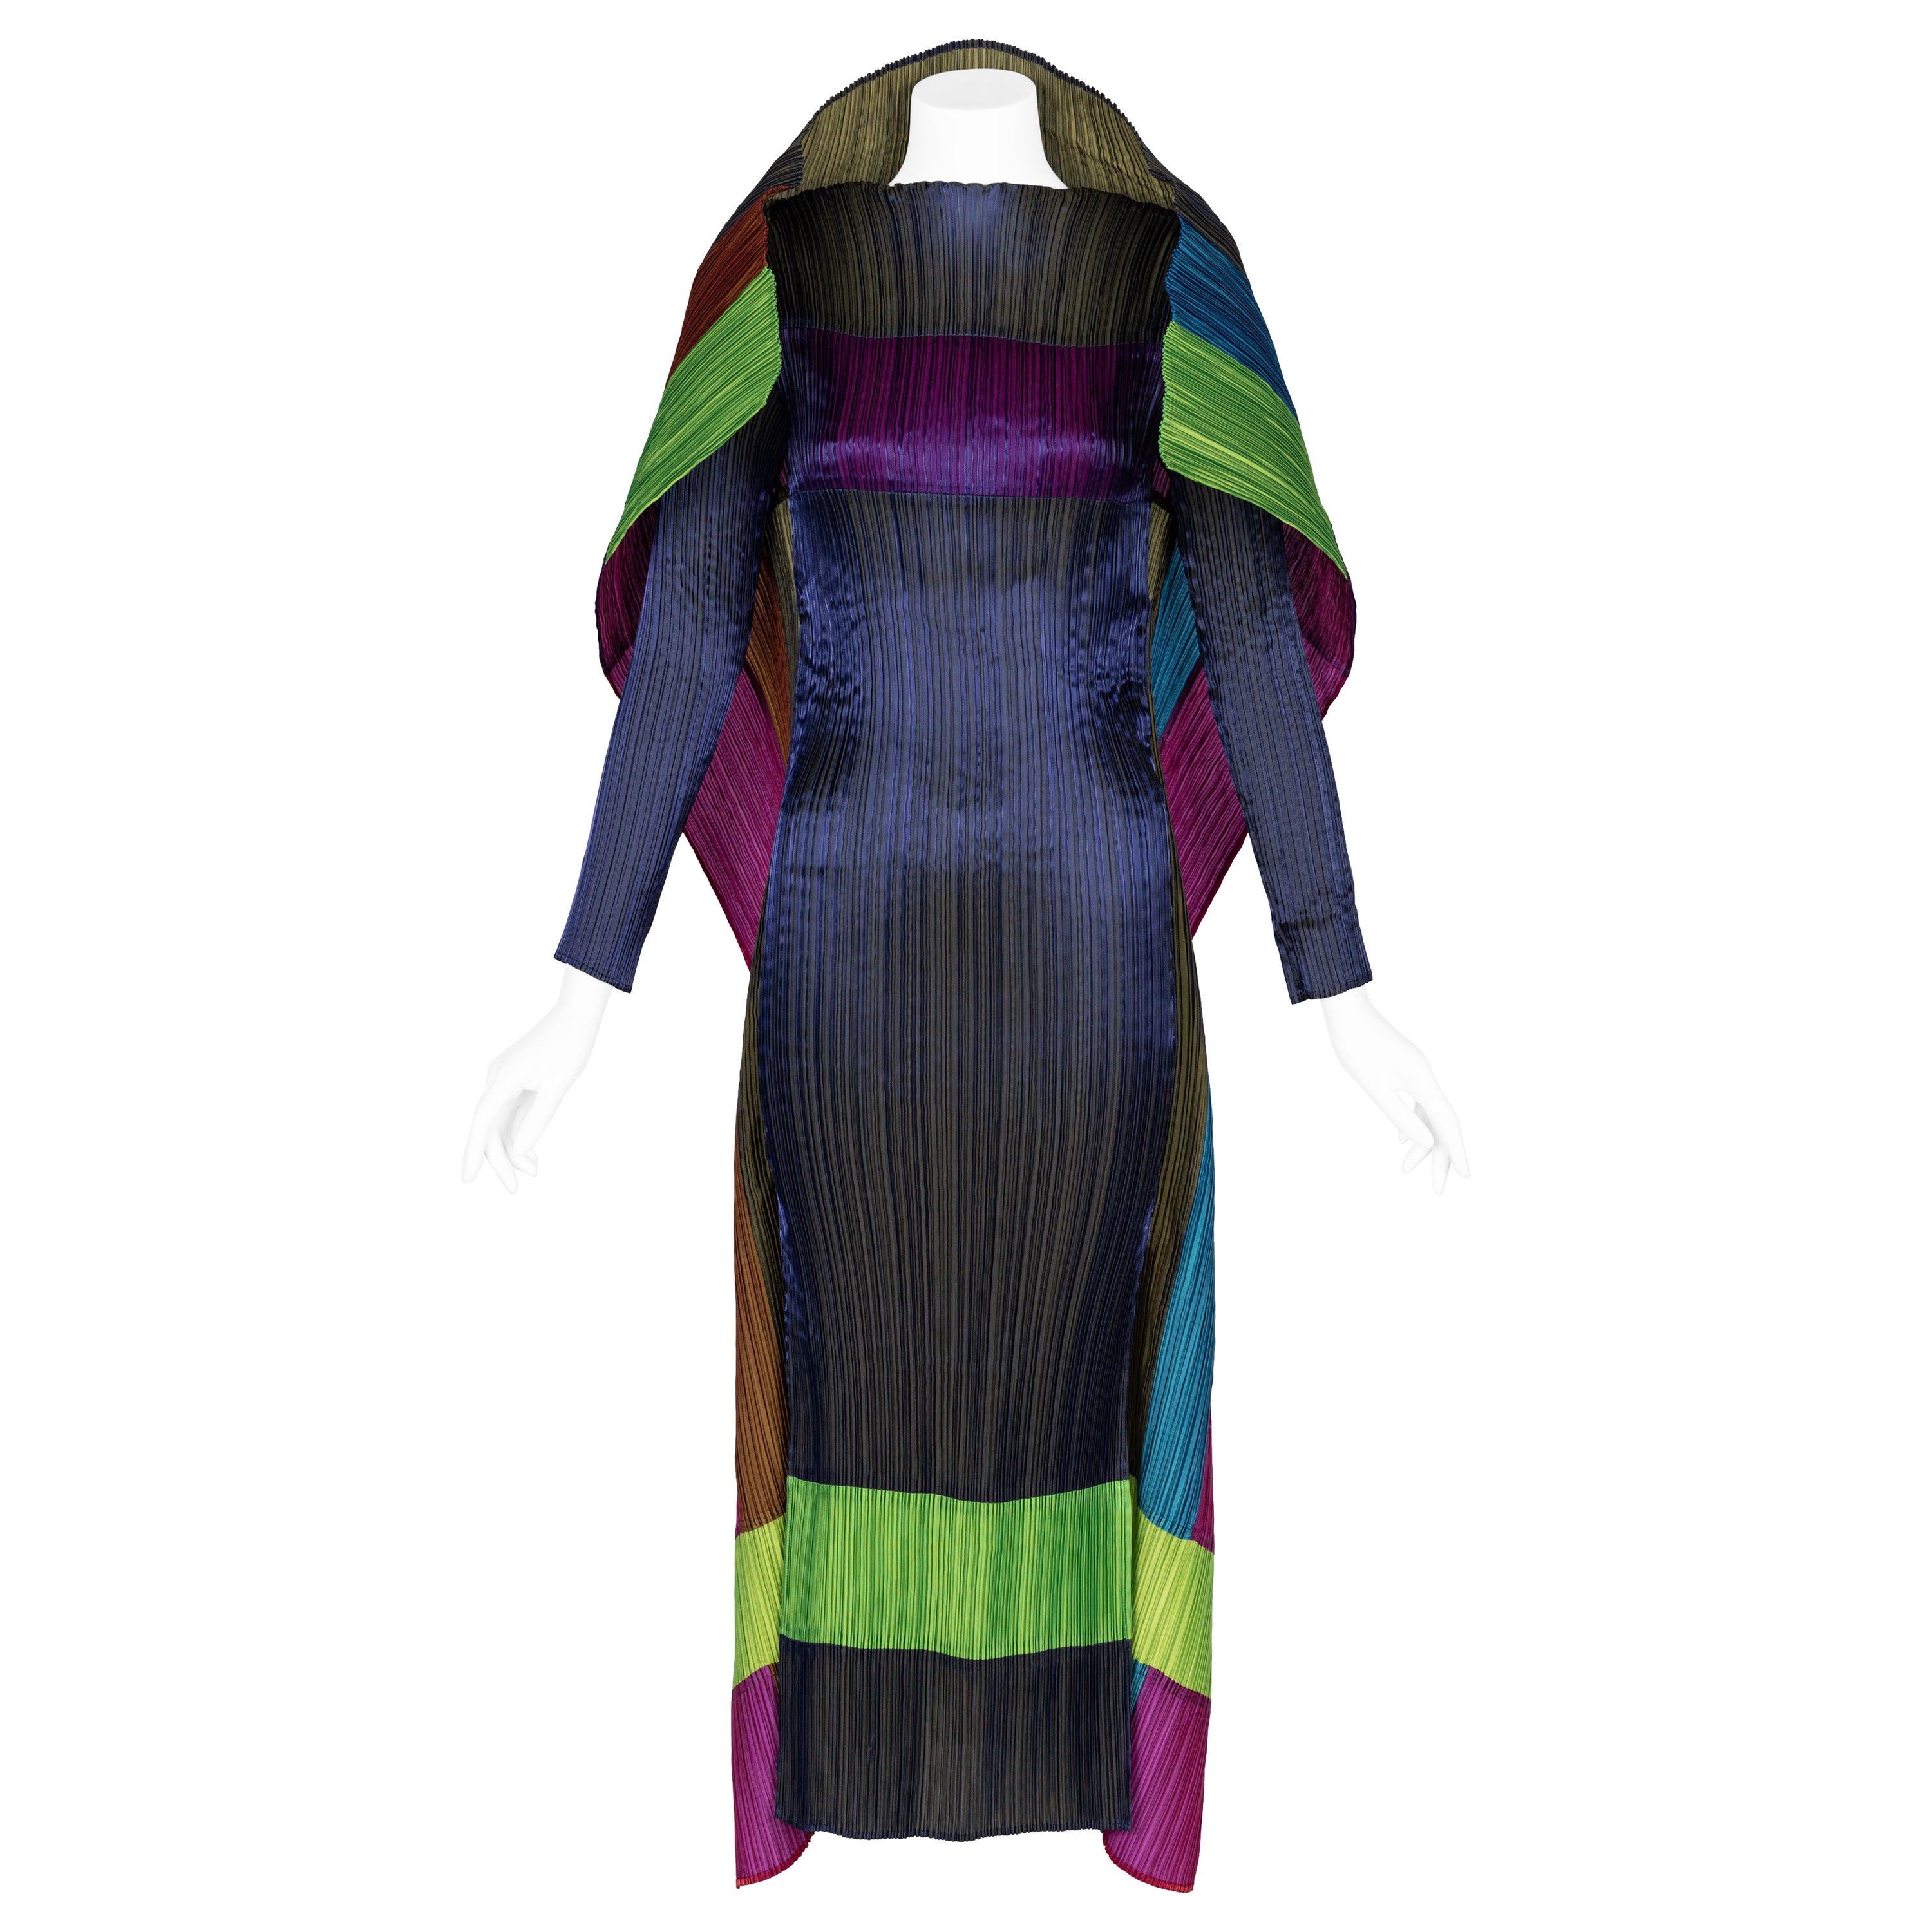 Incredible Rare Issey Miyake Pleats Please Avant Garde Color Block Dress For Sale